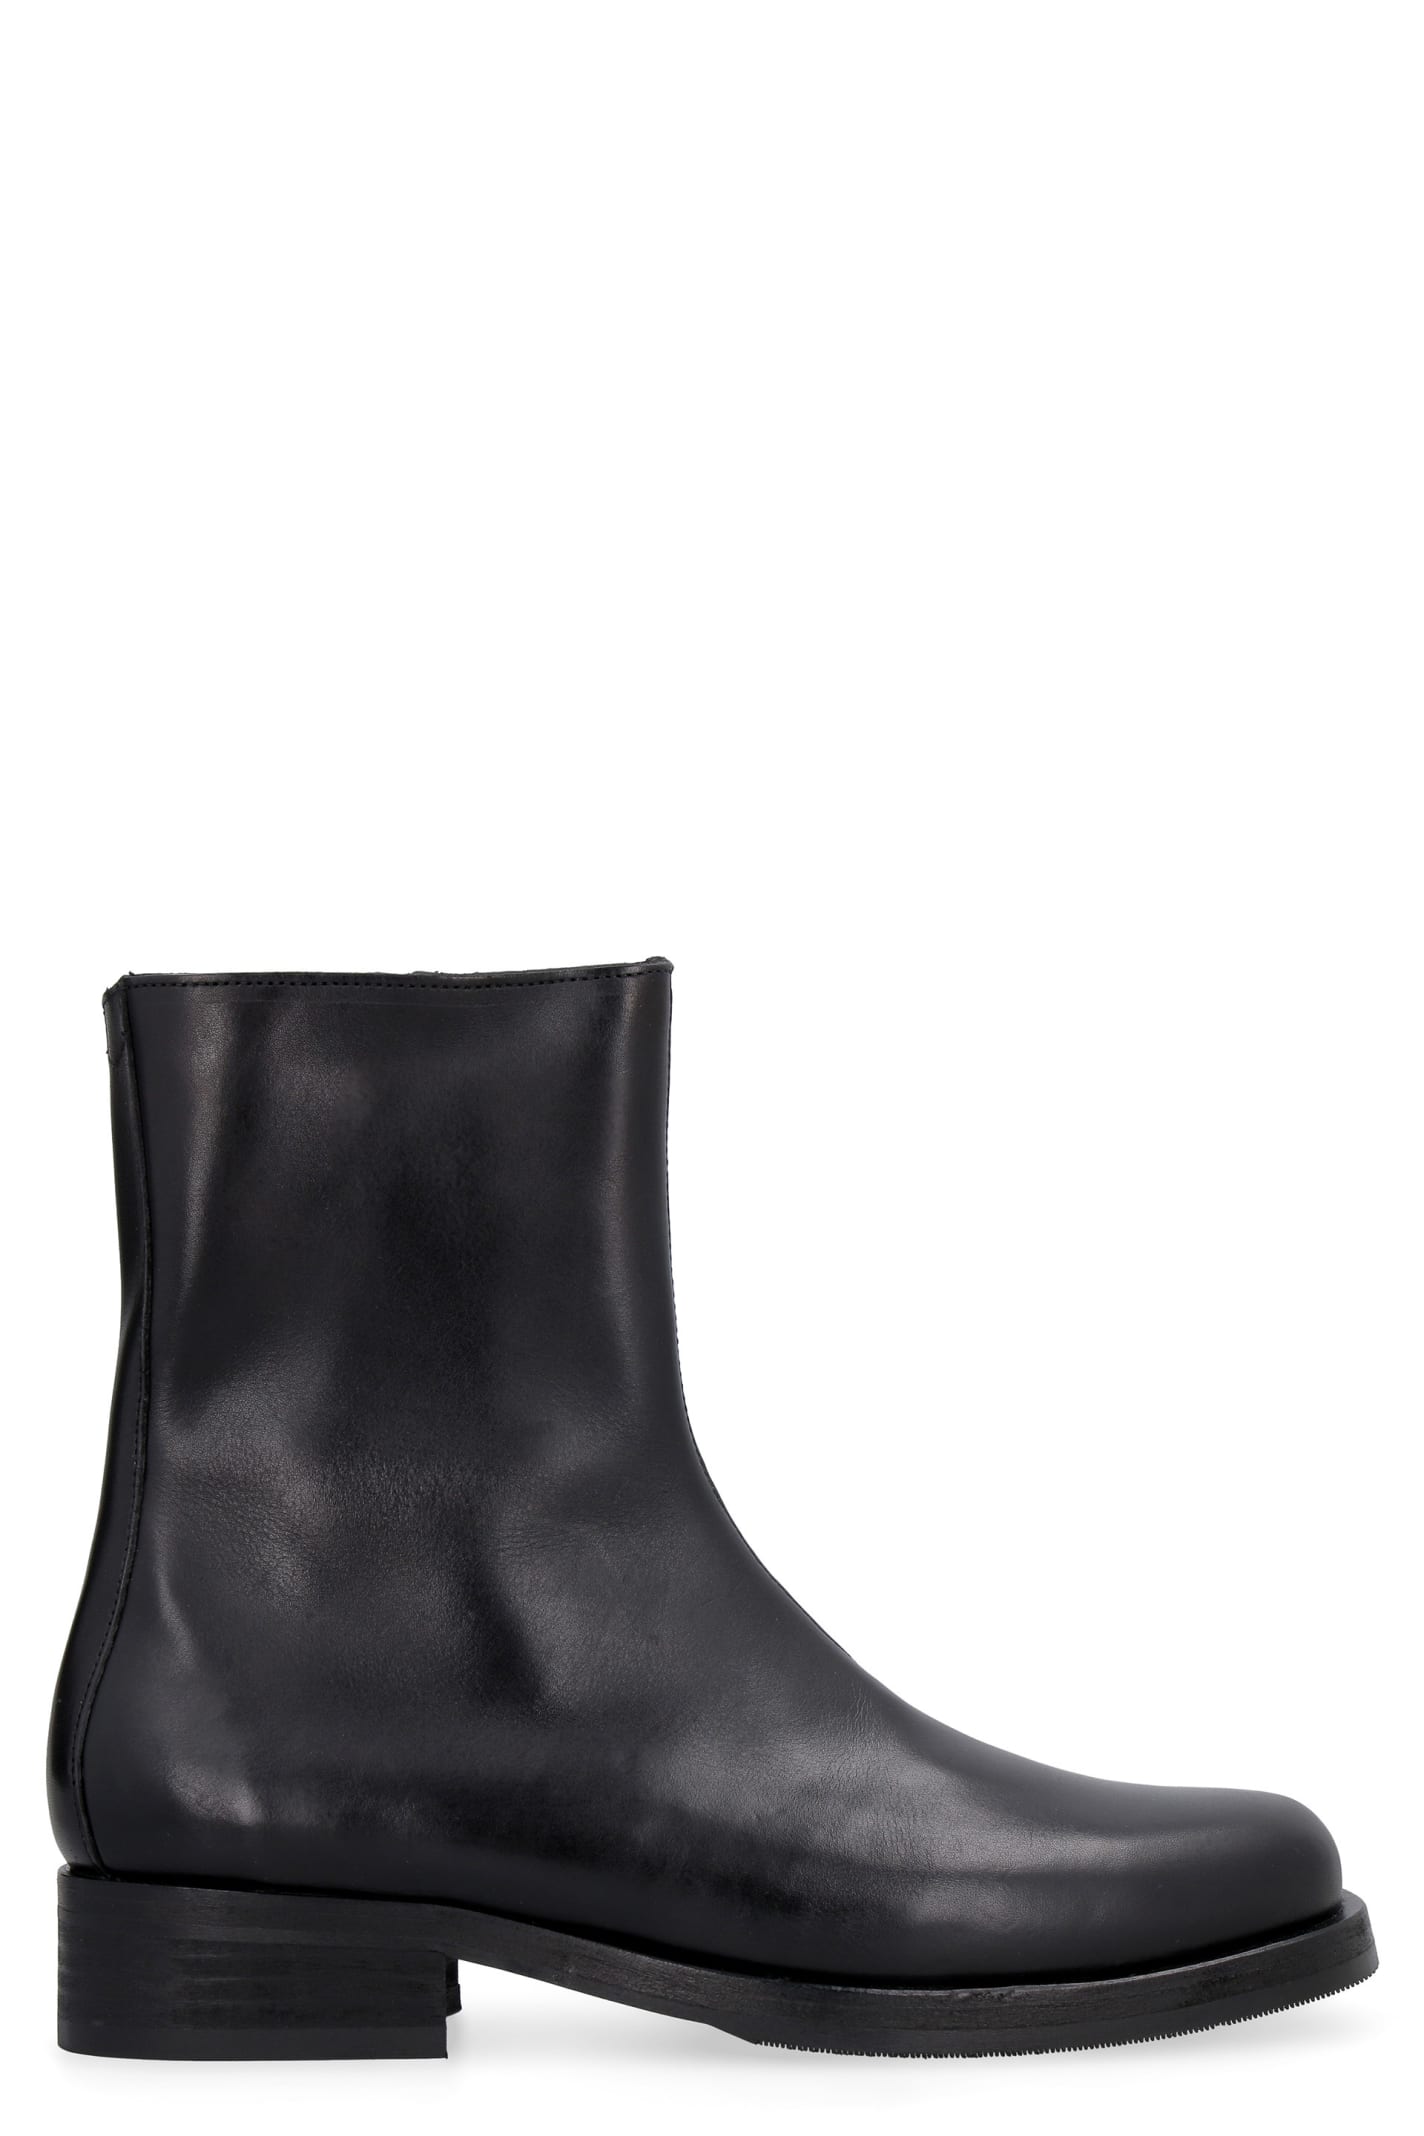 Our Legacy Leather Ankle Boots